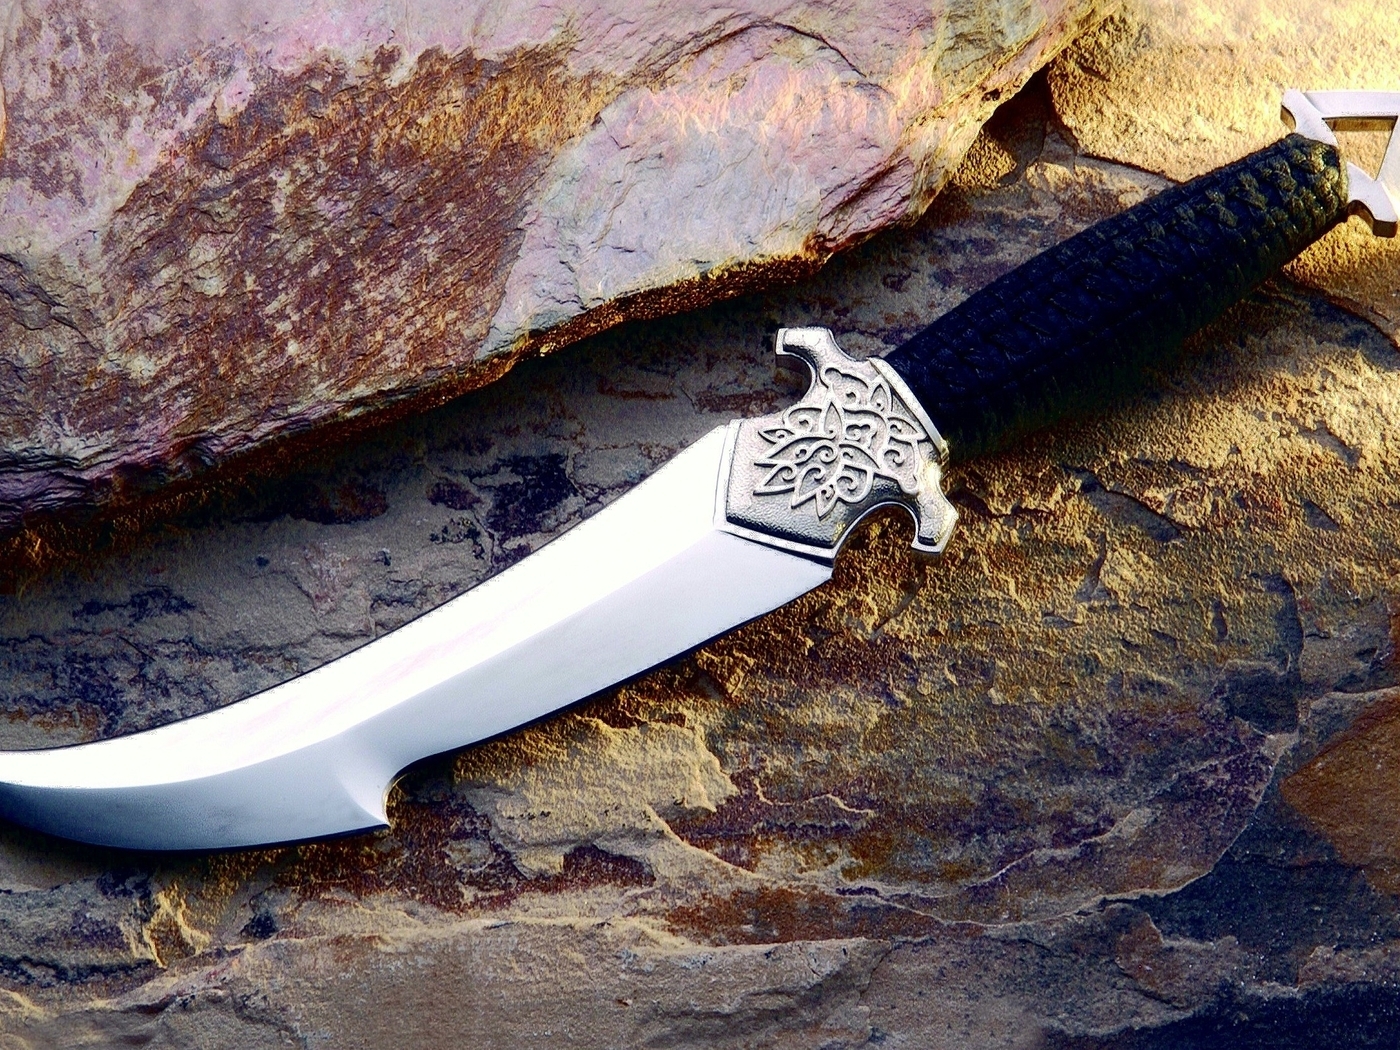 Image: Blade, knife, steel, cold weapons, stone